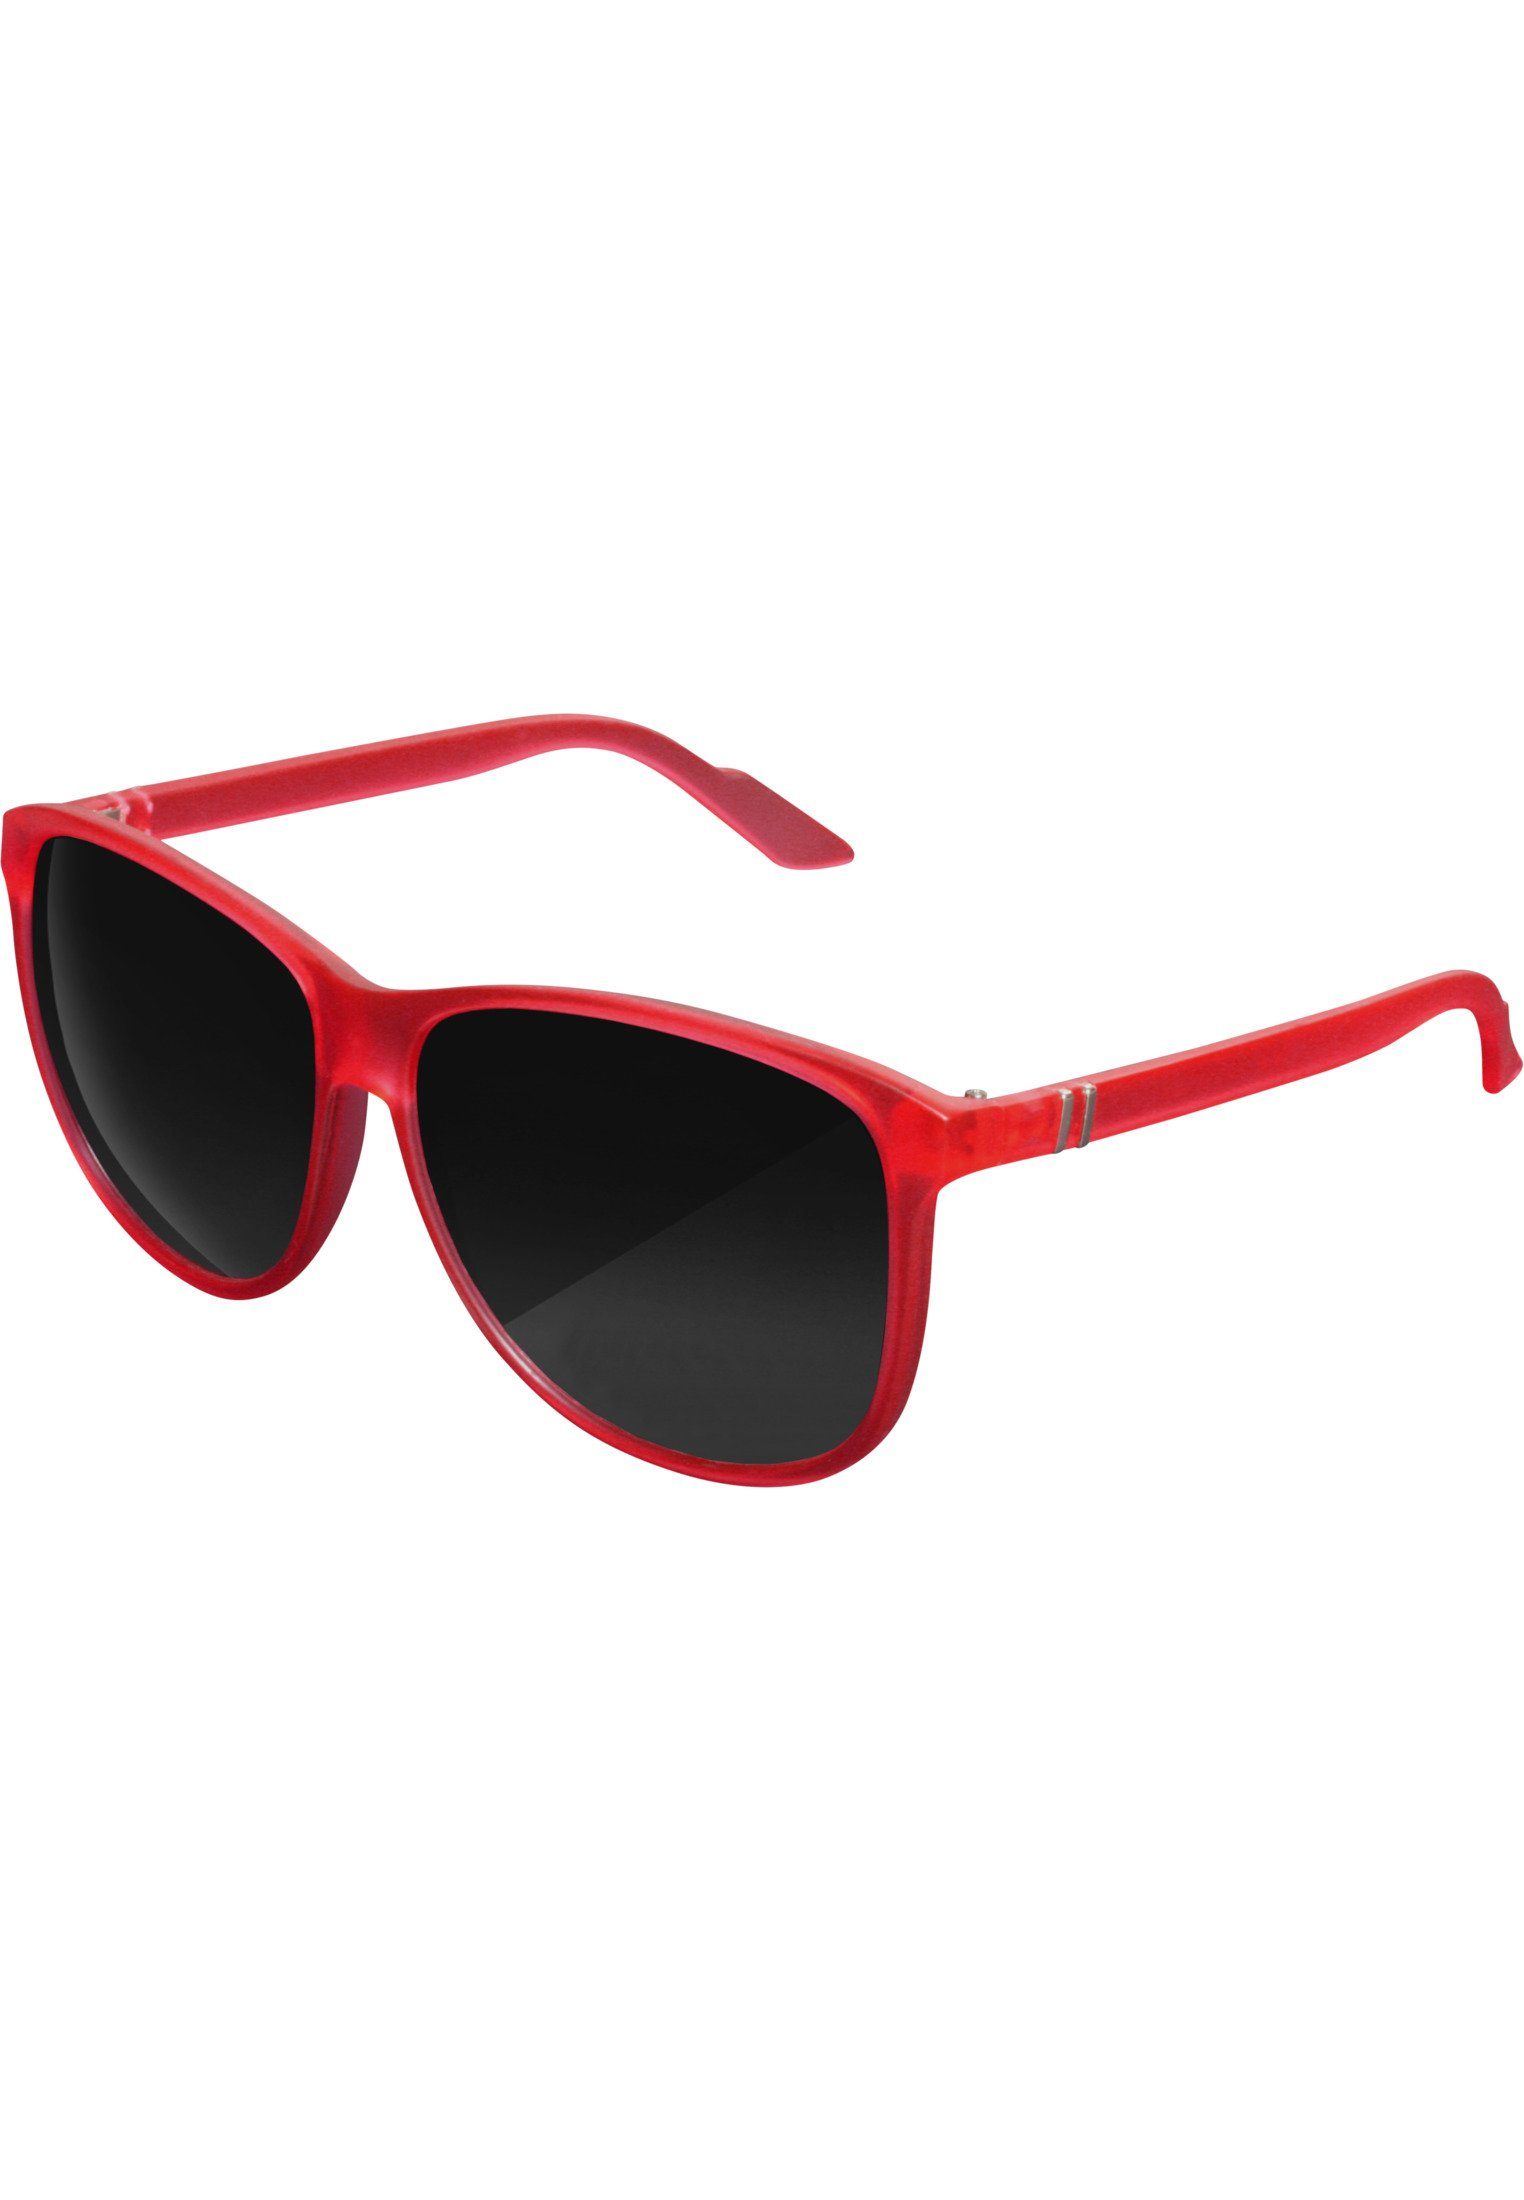 Sonnenbrille MSTRDS Chirwa Sunglasses Accessoires red